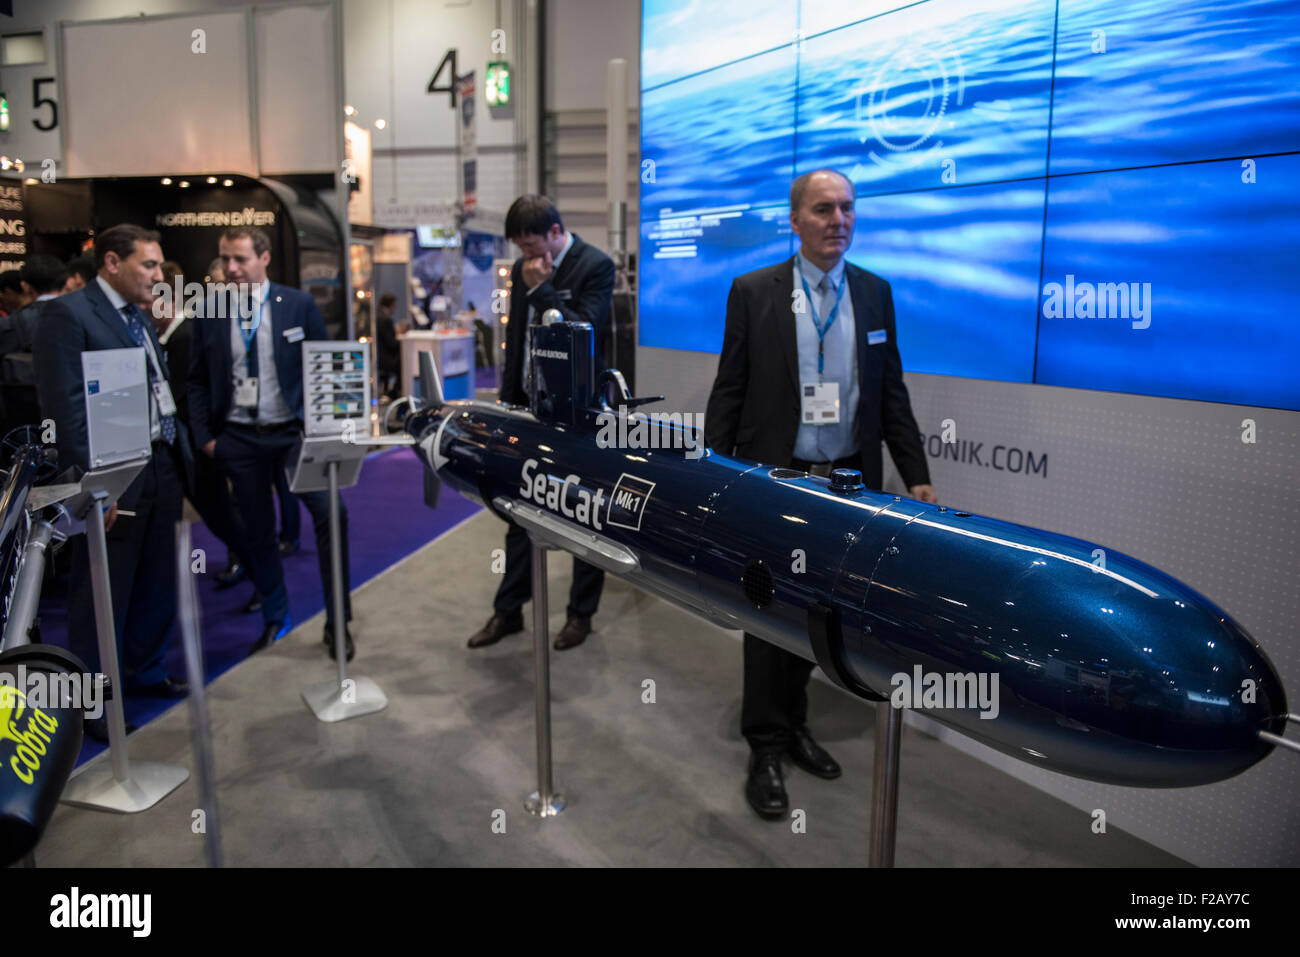 London, UK. 15th September, 2015. A marine weapon on display at DSEI, the world’s largest international defence & security exhibition held at London’s ExCel centre. Credit:  Peter Manning/Alamy Live News Stock Photo